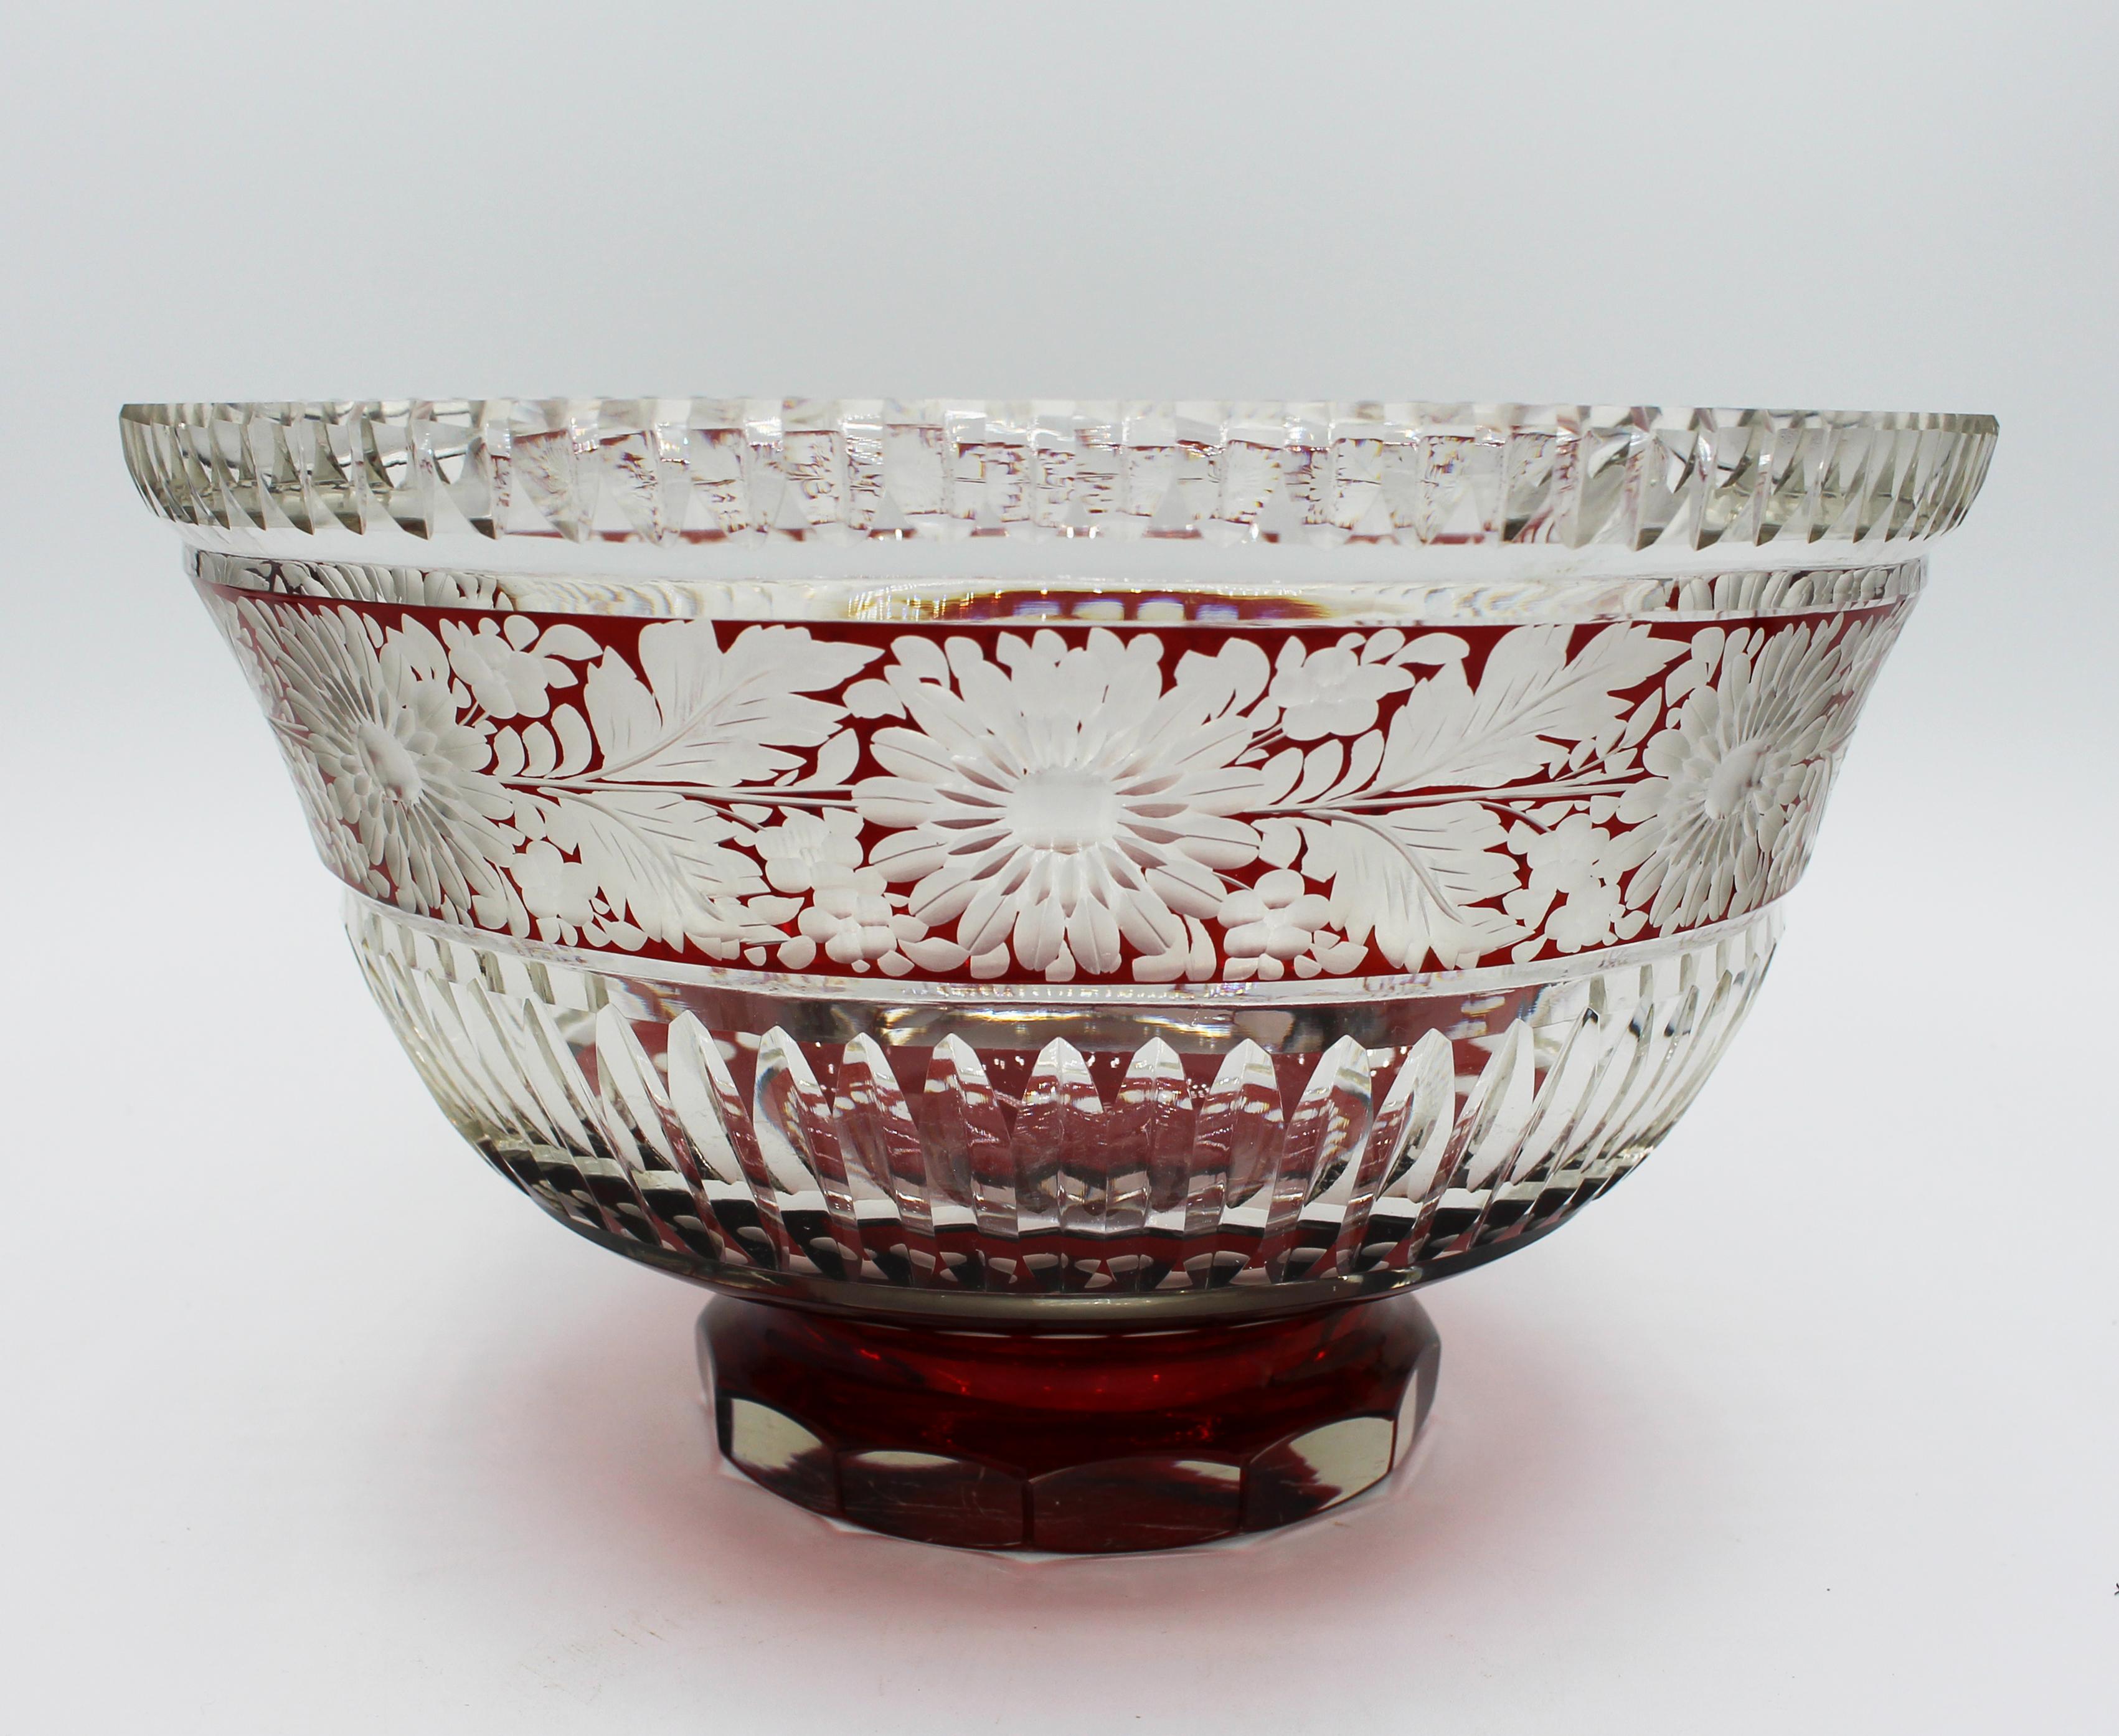 A cut, engraved and ruby flashed glass center bowl - a tour de force of brilliant cut glass work. Regency taste. c.1900. Measures: 9 3/4